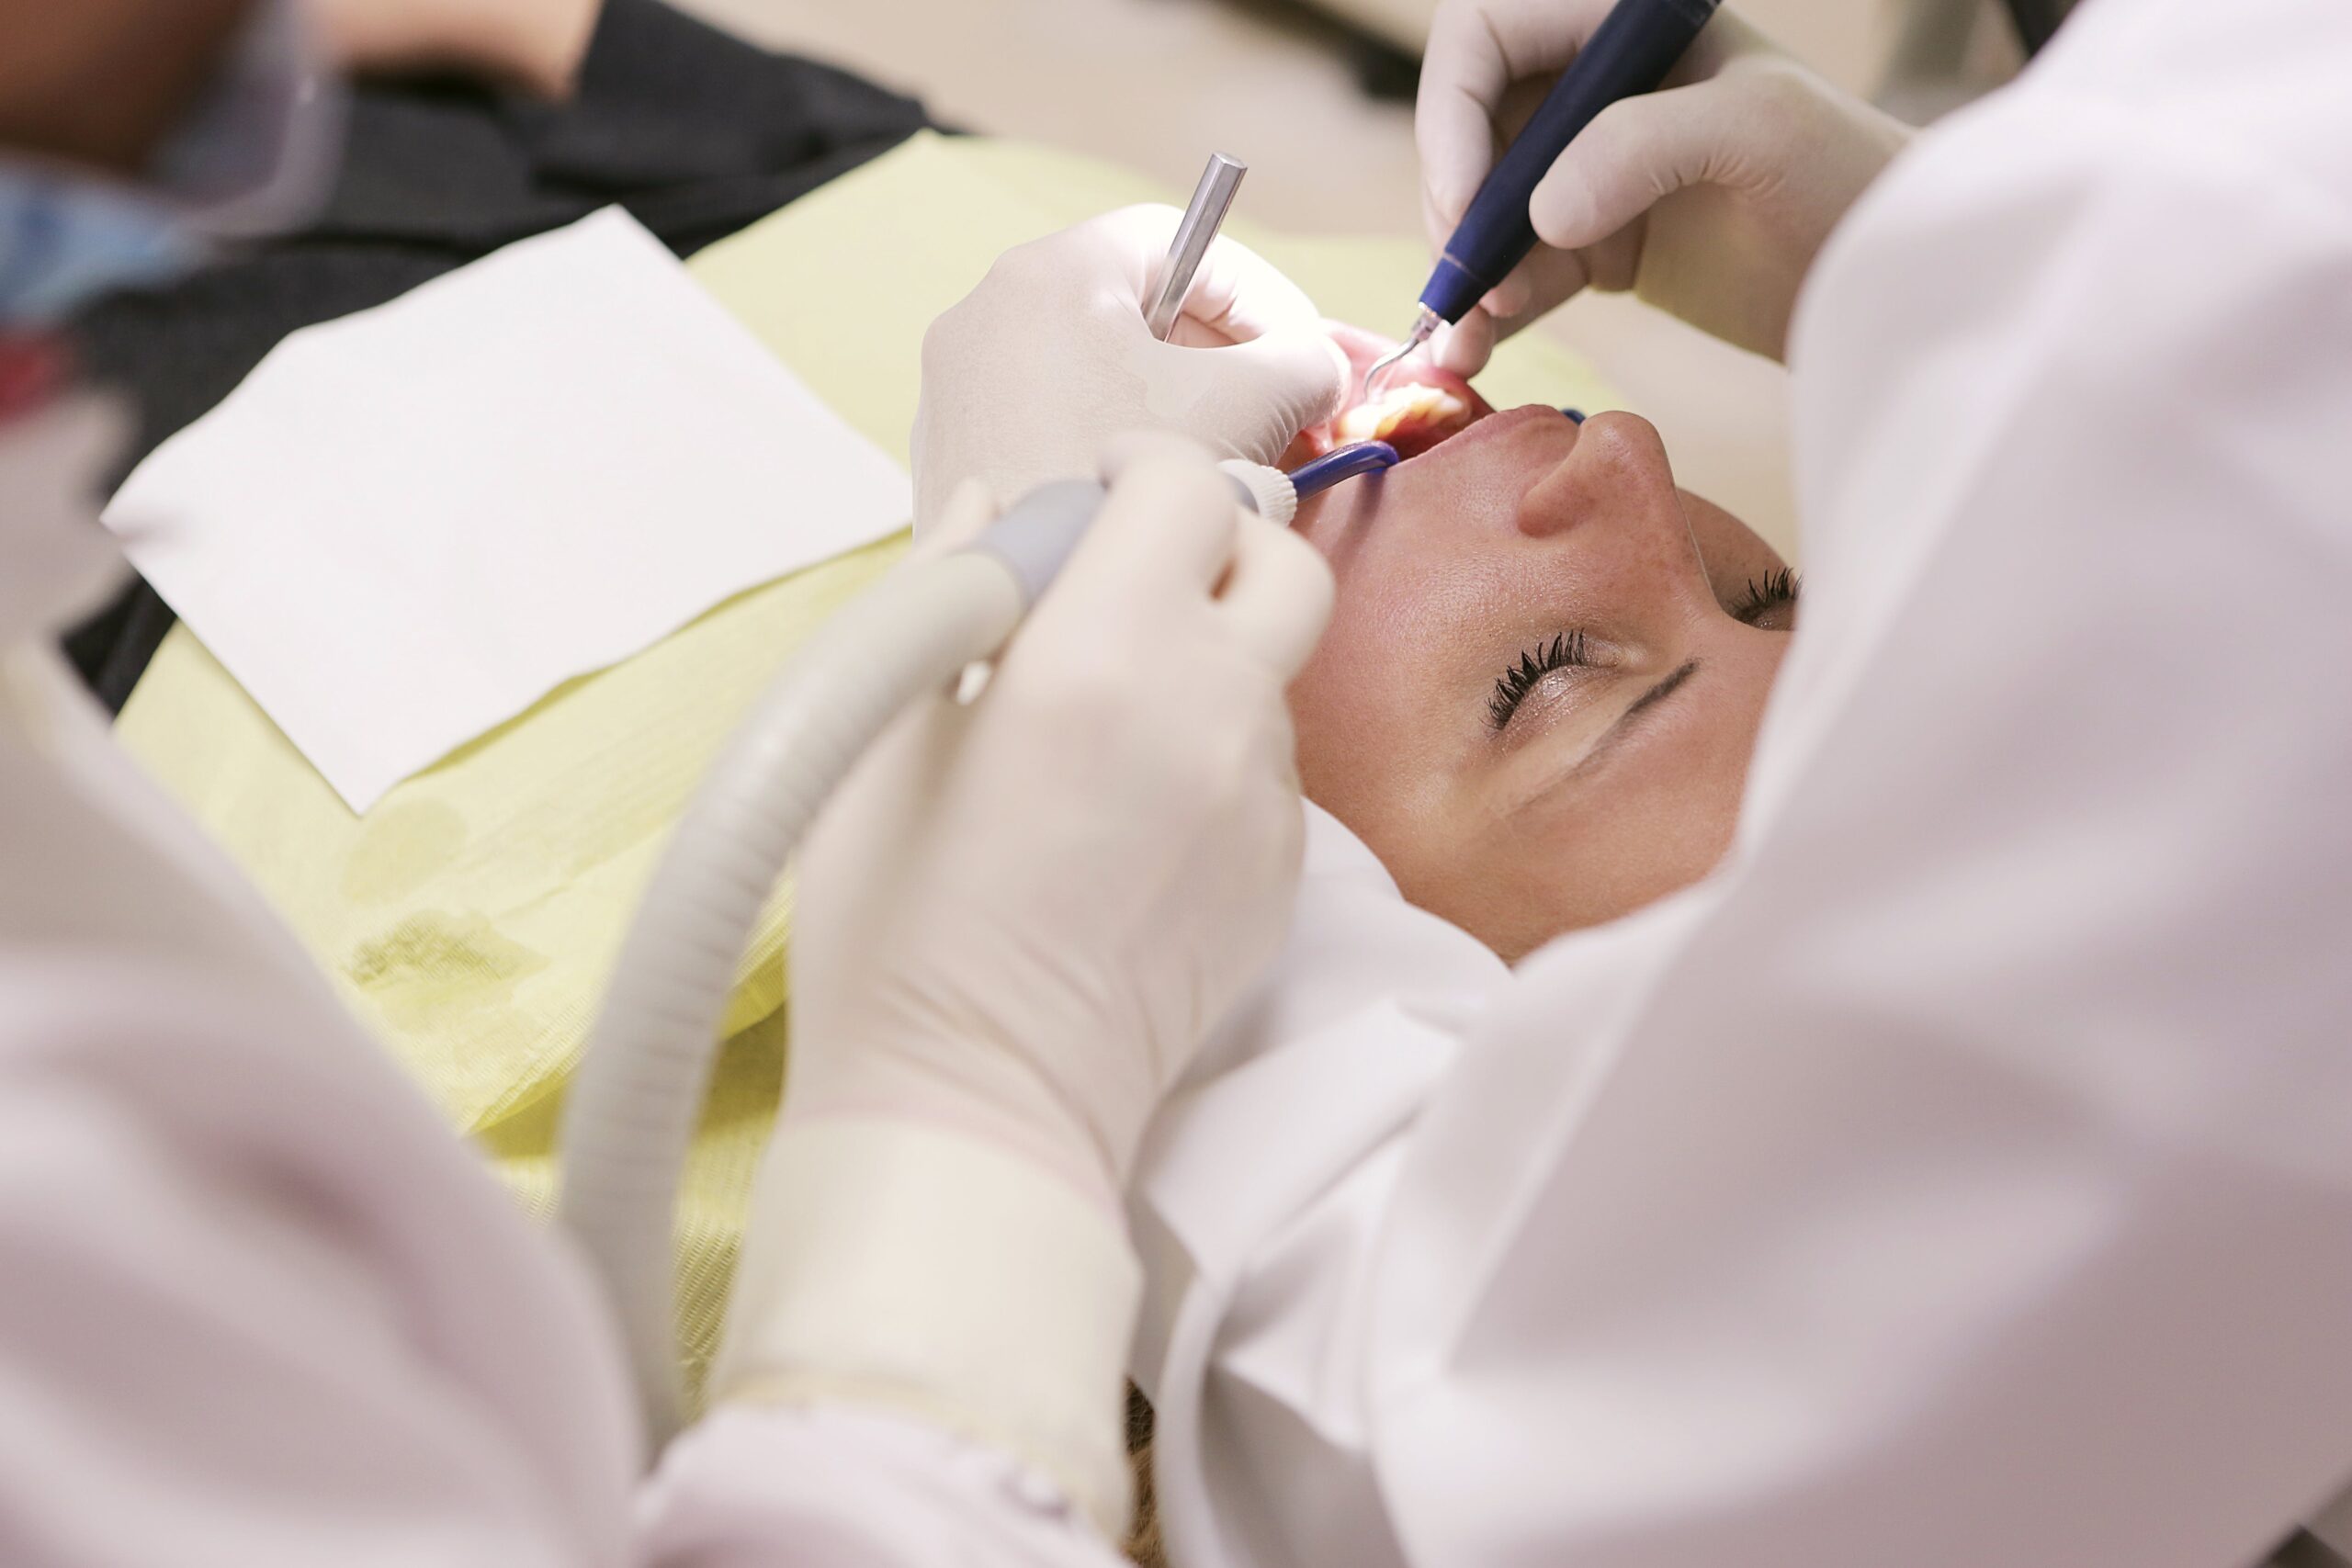 Medicare Dental Vision and Hearing Care